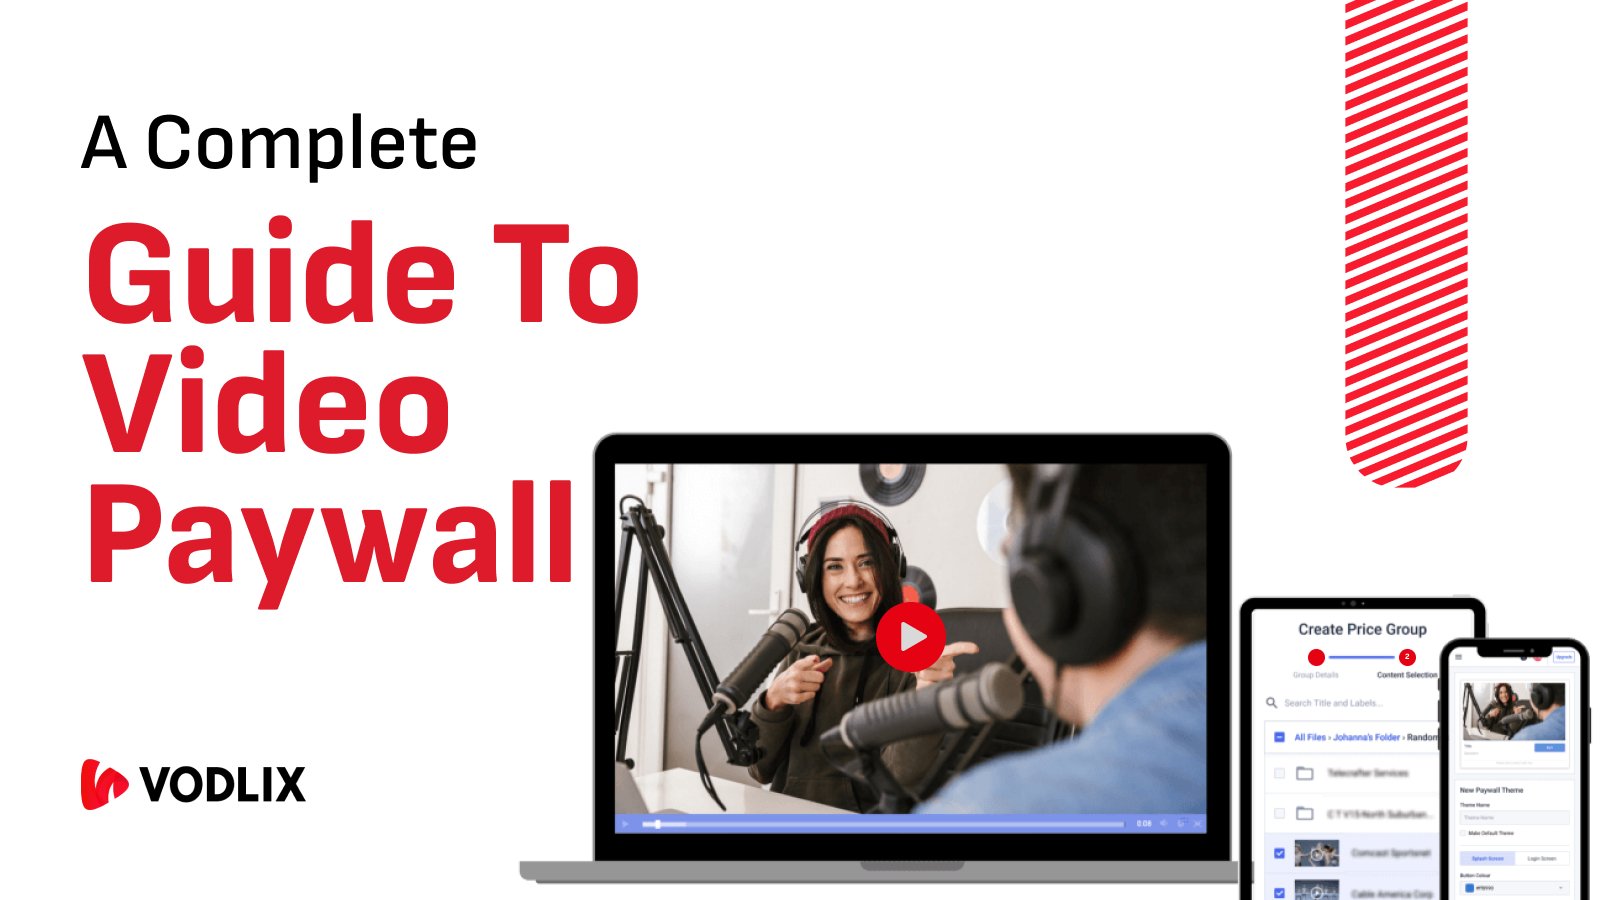 A Complete Guide To Video Paywall